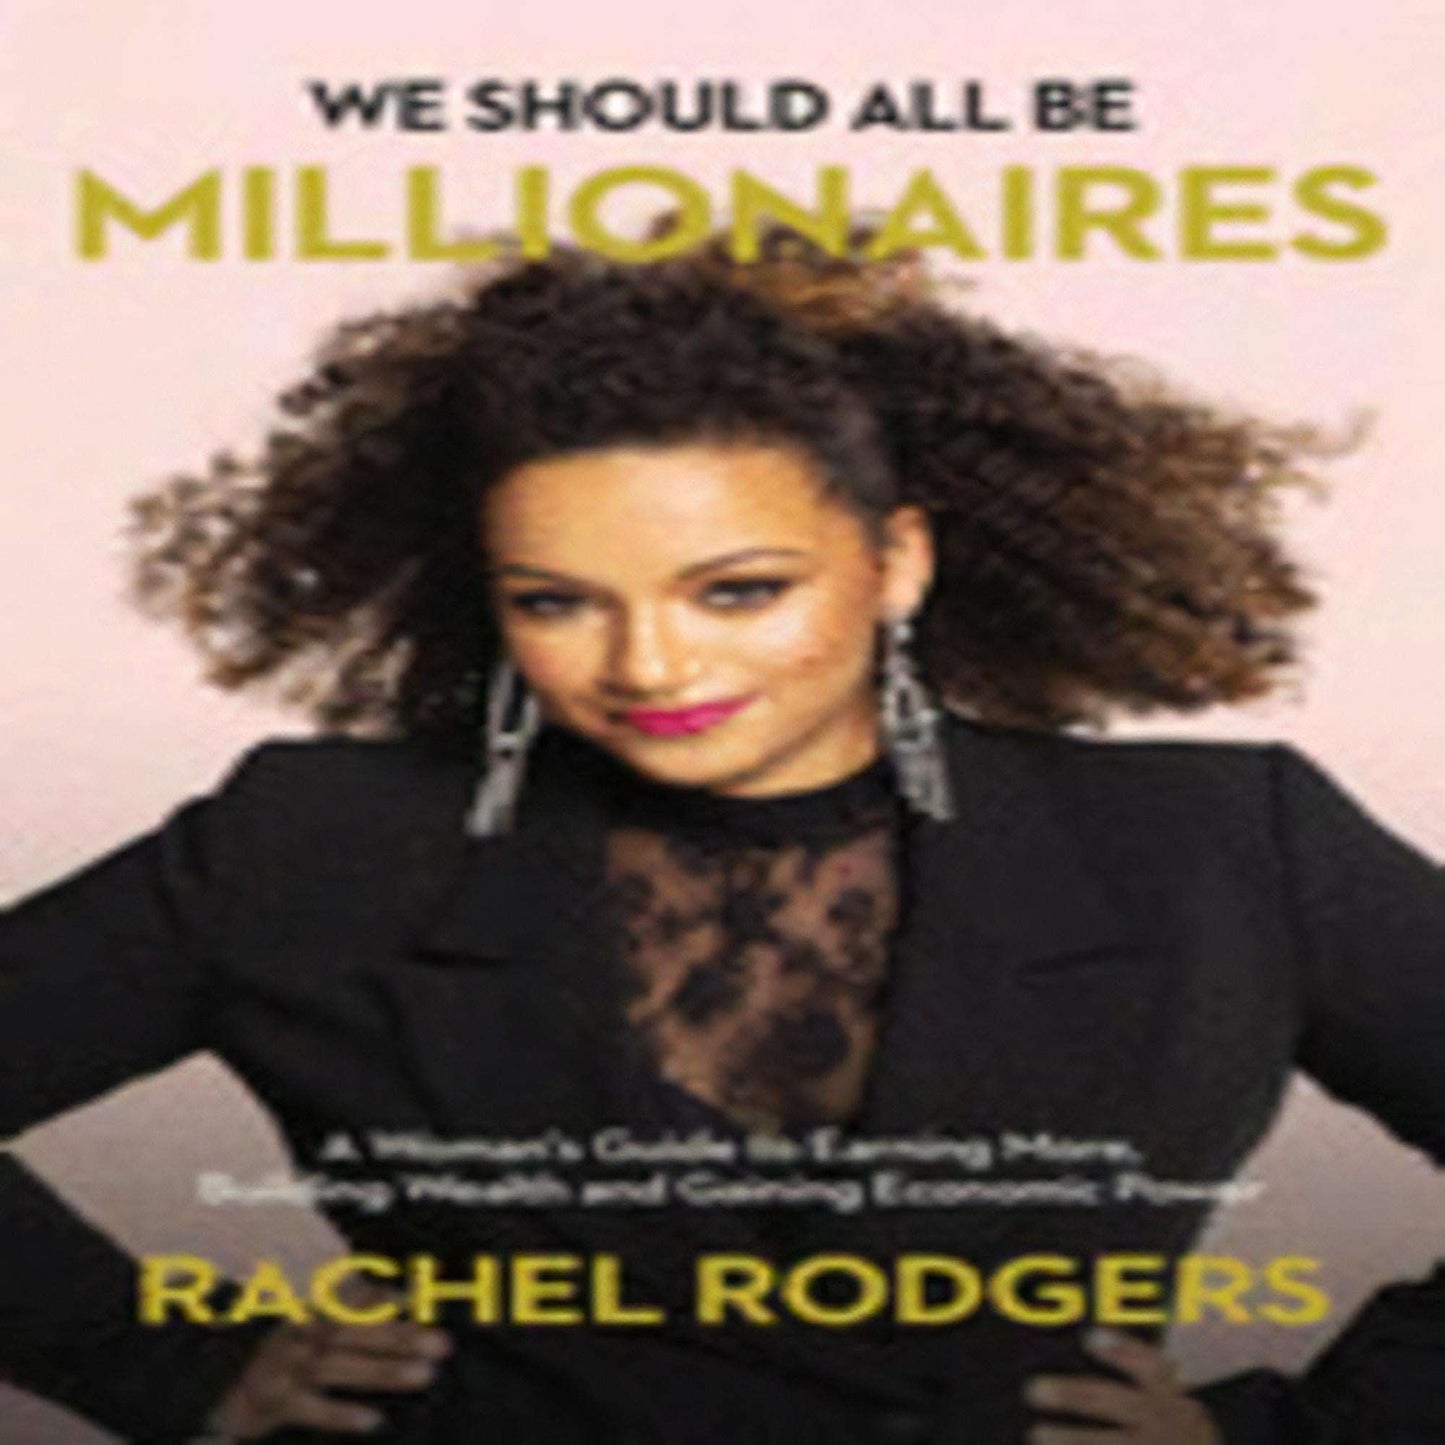 We Should All Be Millionaires: A Woman's Guide to Earning More, Building Wealth, and Gaining Economic Power274-050623-9781400221622DPGBOOKSTORE.COM. Today's Bestsellers.